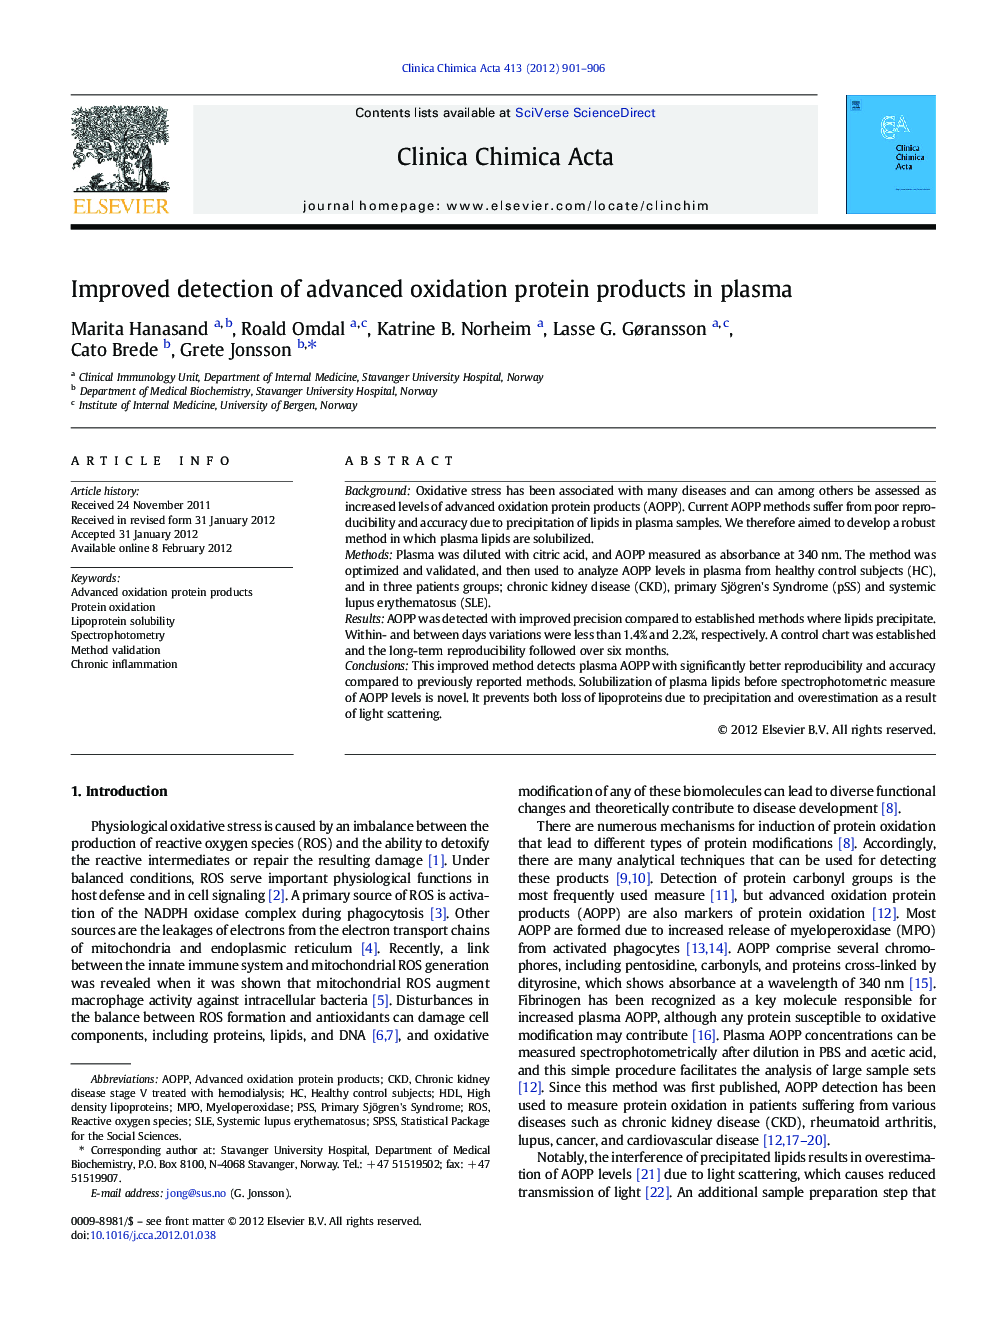 Improved detection of advanced oxidation protein products in plasma